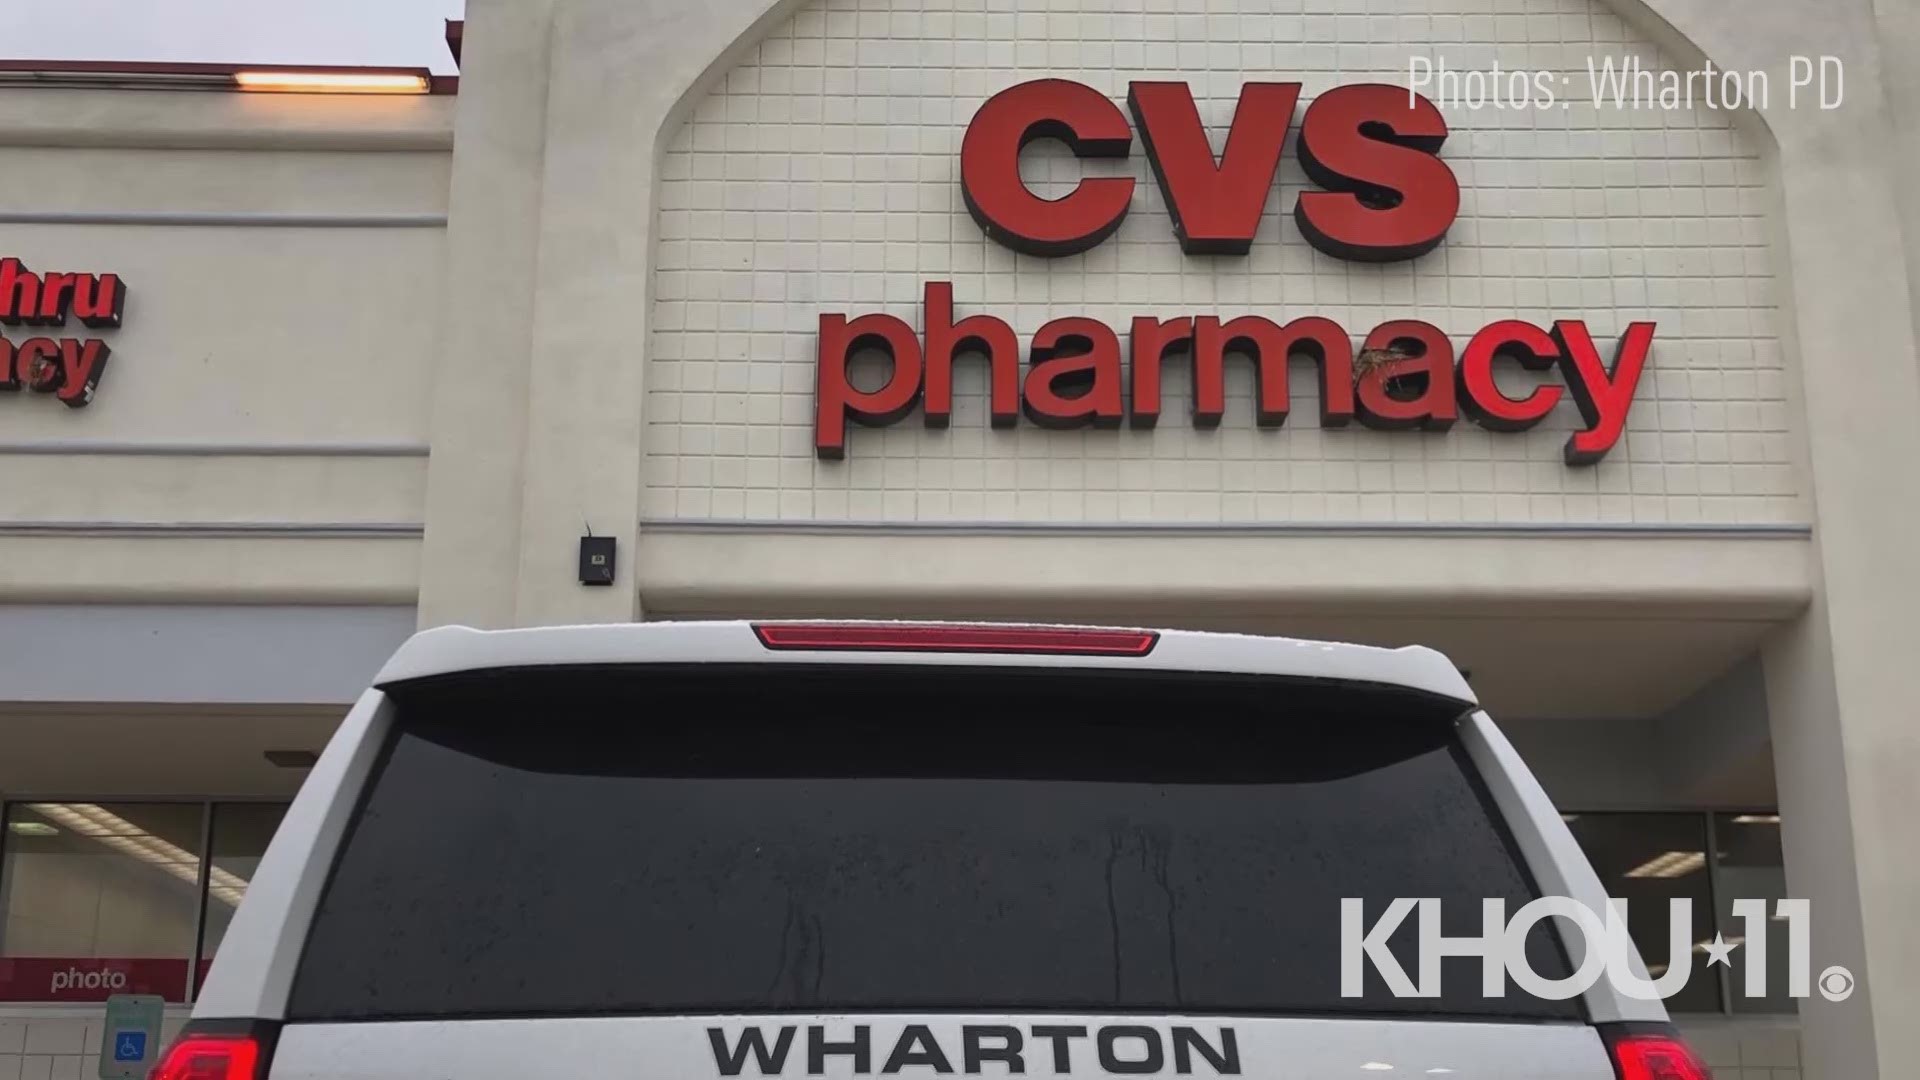 Police in Wharton, southwest of Houston, arrested a total of four suspects who were "barricaded" in the crawl space of a CVS store there. One of the suspects somehow ended up in a column outside the store.